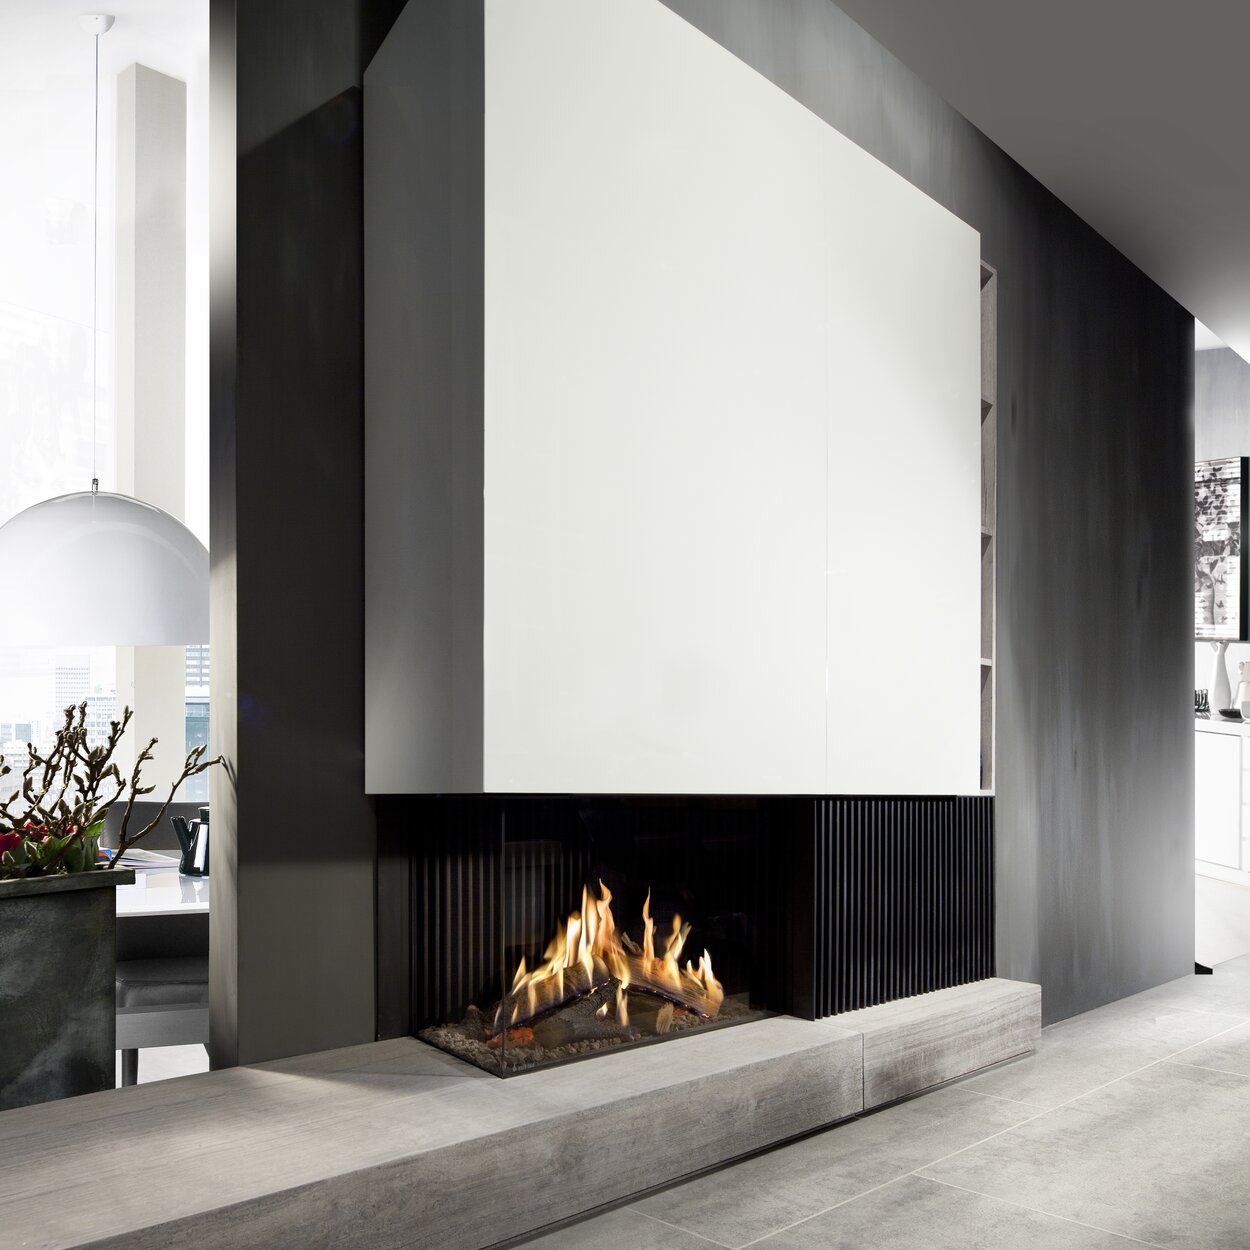 2-sided glazed gas fireplace GP80/55C on a stone ledge with white panelling in a modern living room